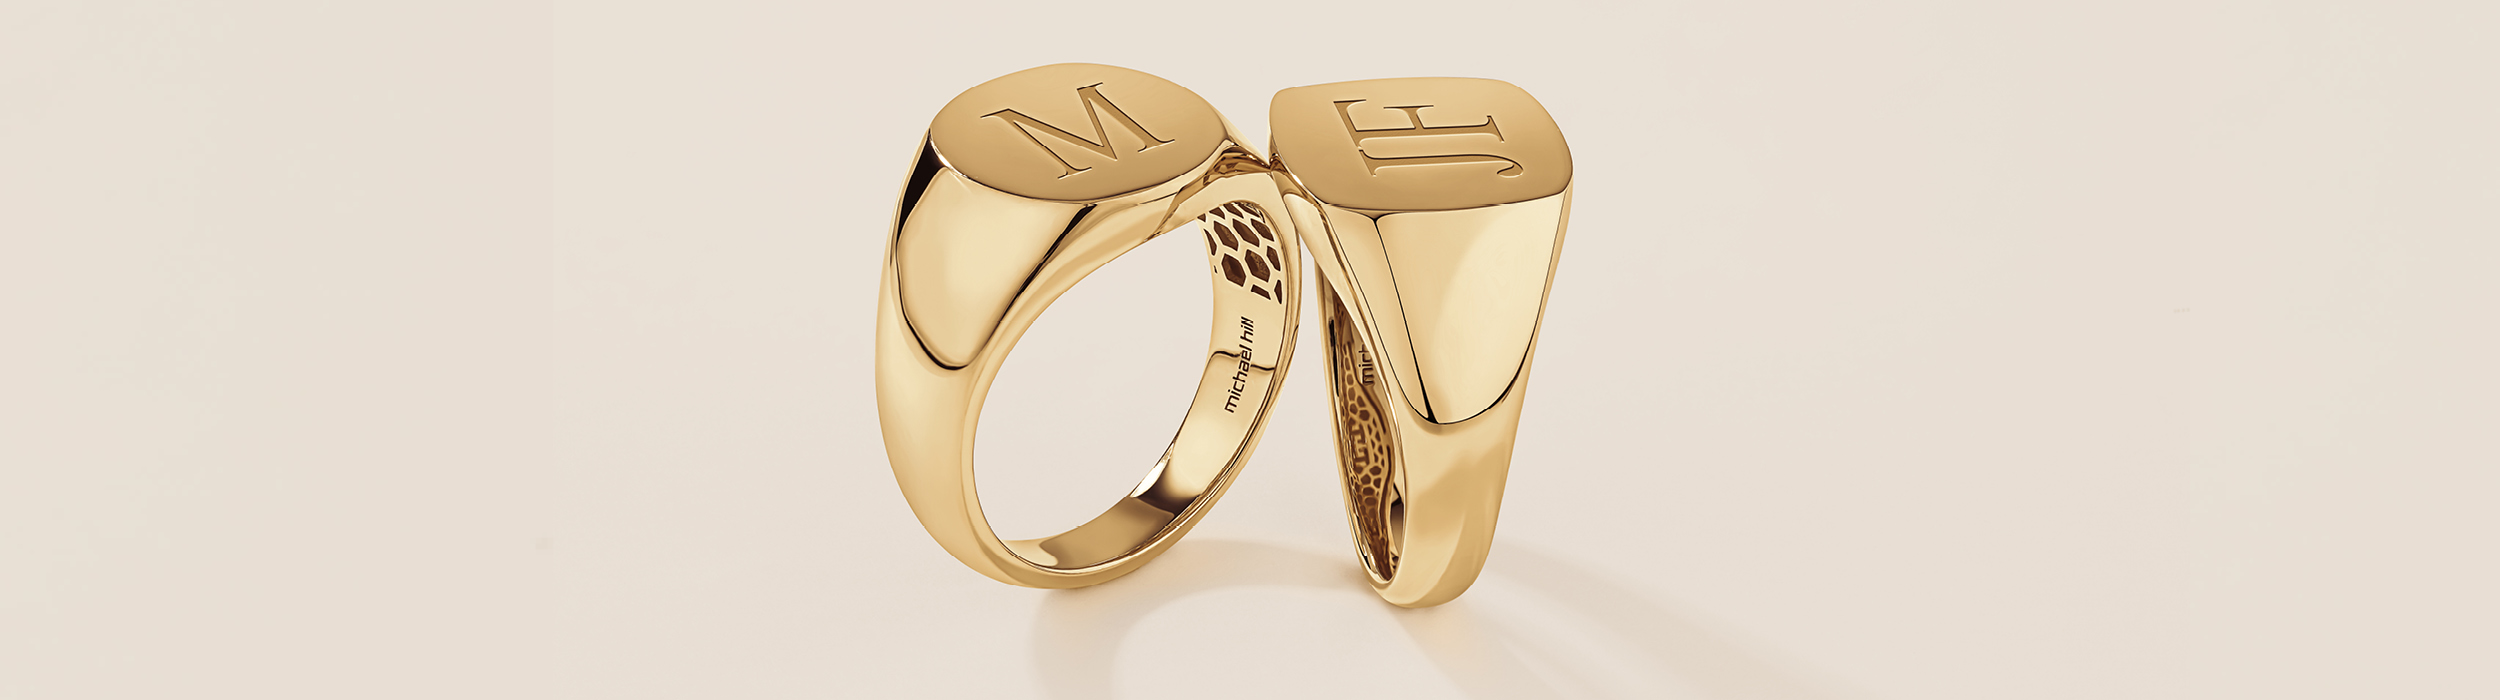 Yellow gold singet rings engraved with initials